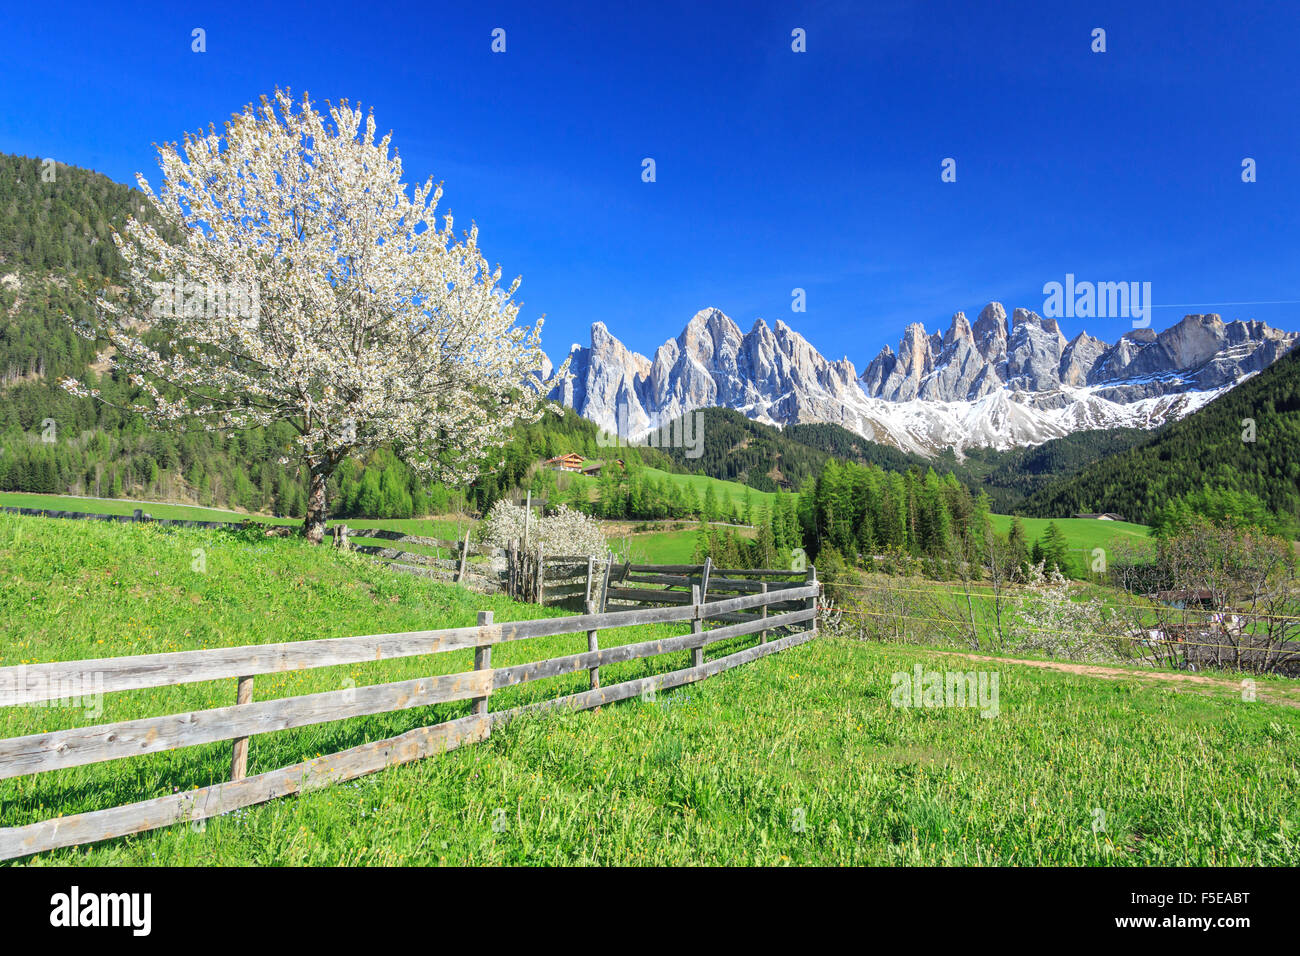 The Odle in background enhanced by flowering trees, Funes Valley, South Tyrol, Dolomites, Italy, Europe Stock Photo